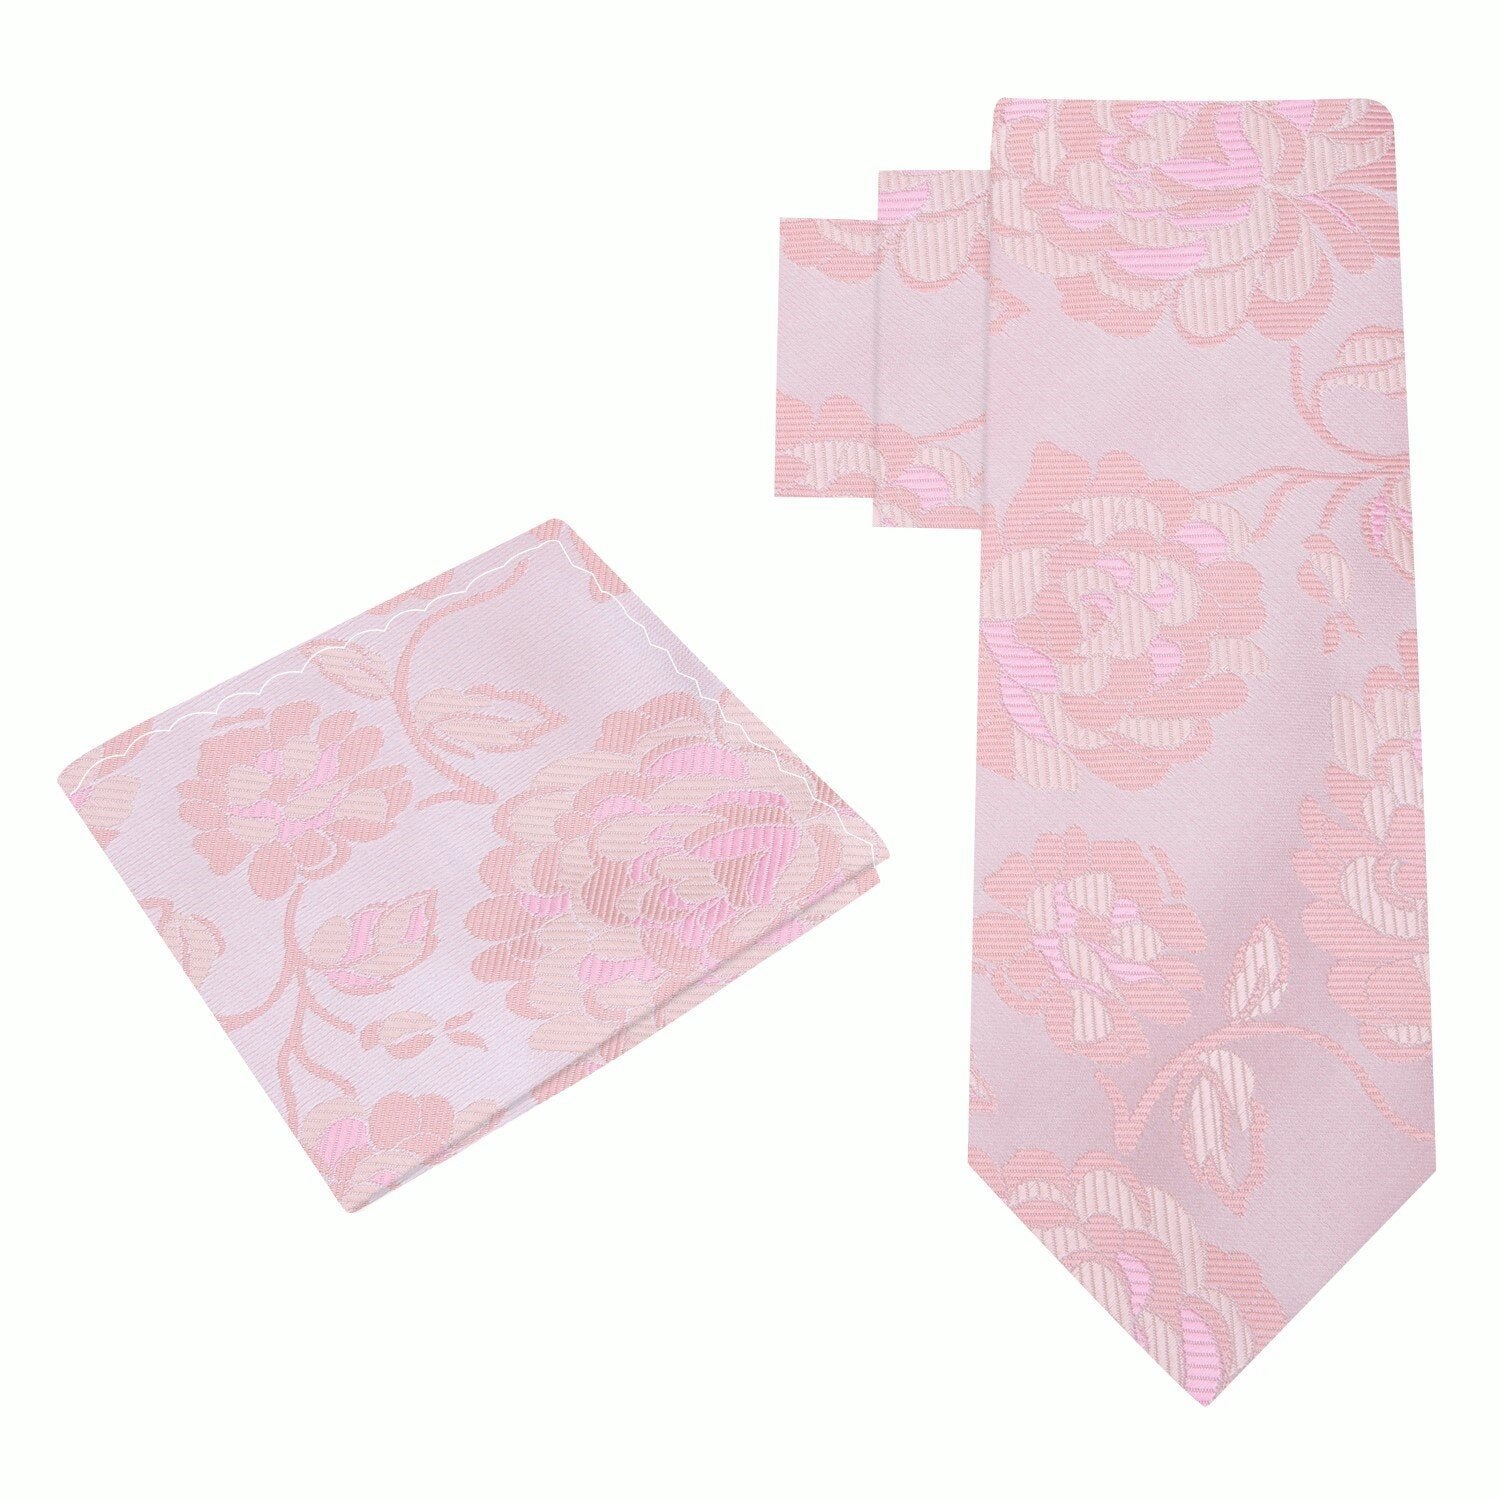 Alternate View: Light Pink Floral Tie and Square|